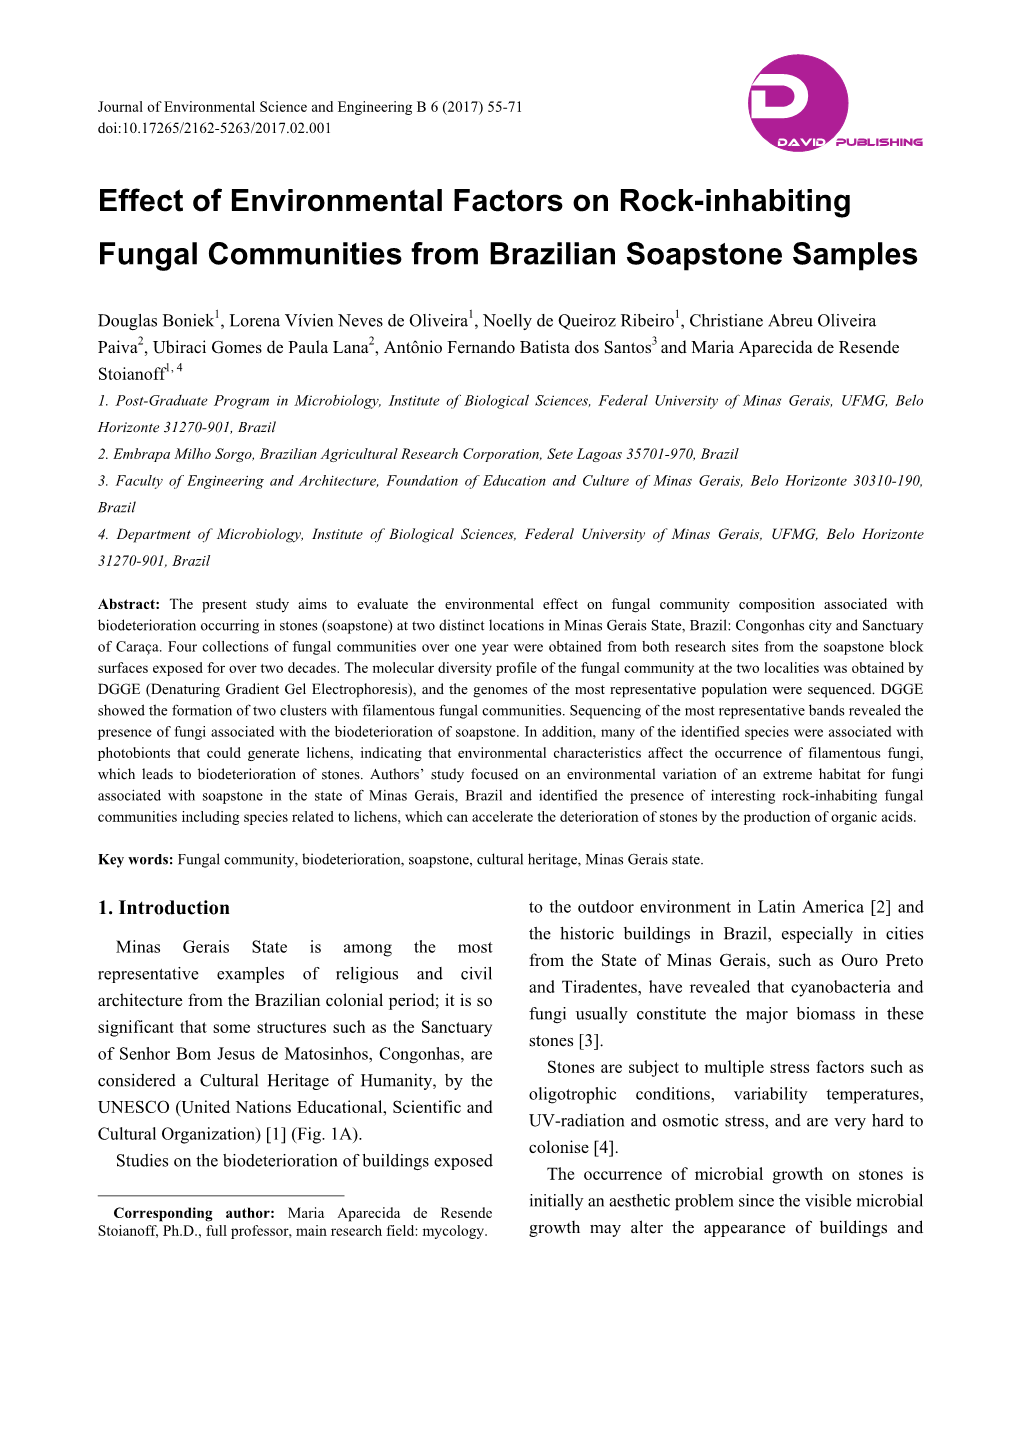 Effect of Environmental Factors on Rock-Inhabiting Fungal Communities from Brazilian Soapstone Samples